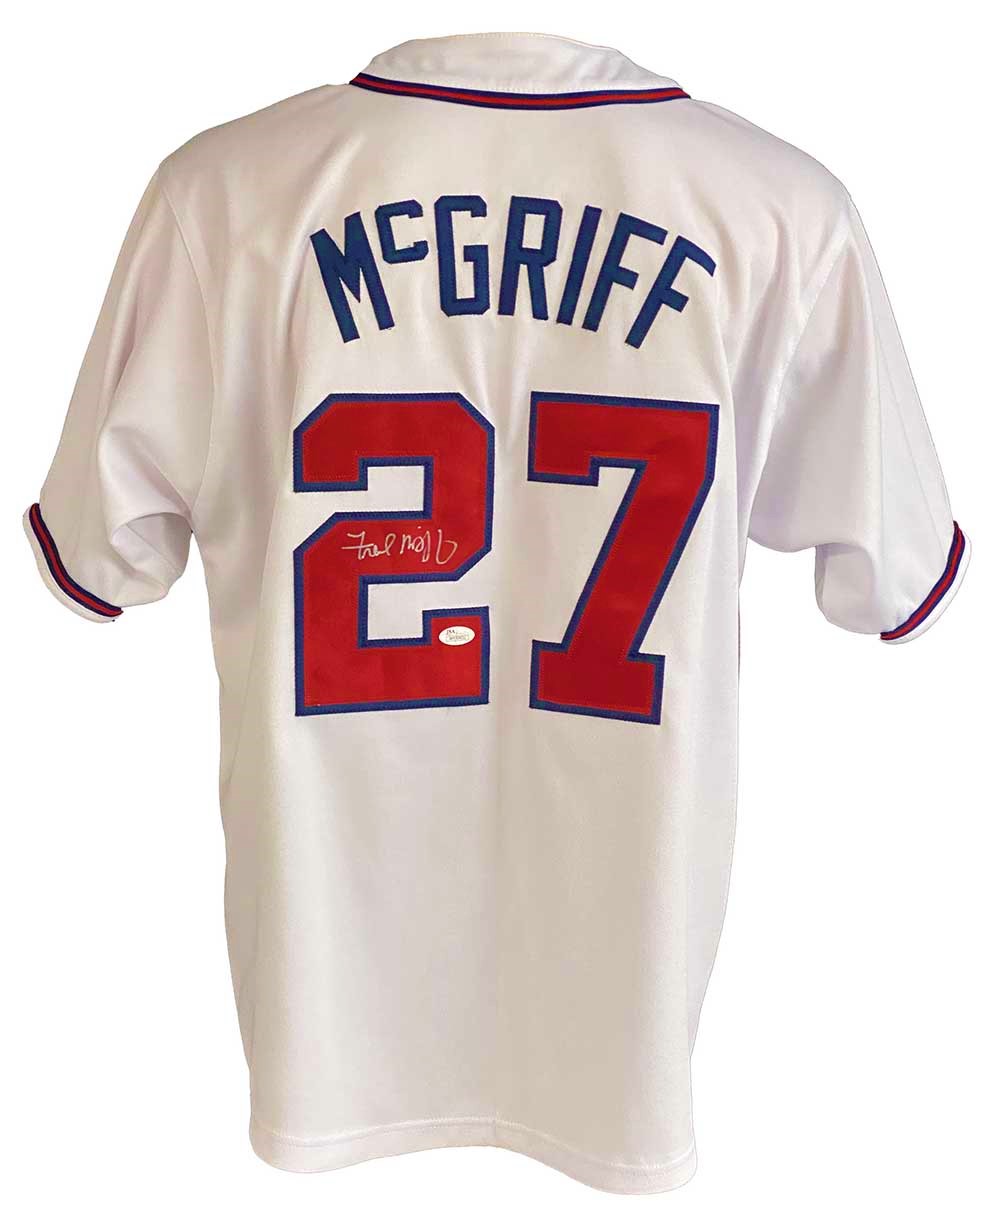 Atlanta Braves Fred McGriff Signed Pro Style White Jersey JSA Authenticated